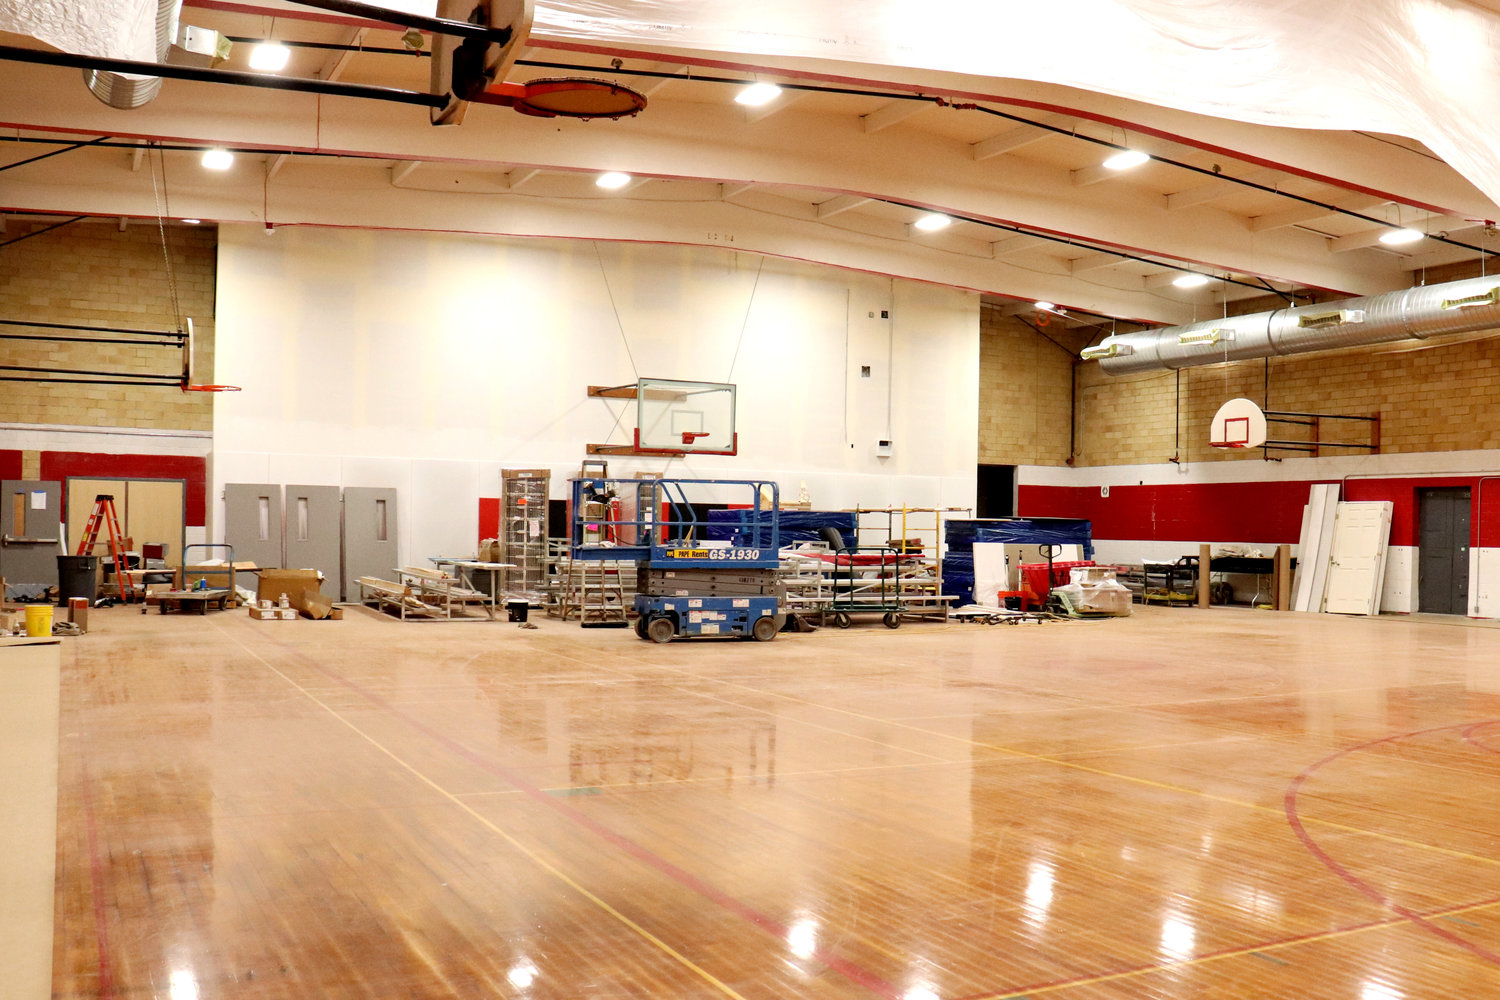 Renovation work in the old gym at Oakville Middle/High School remains in progress on Wednesday.